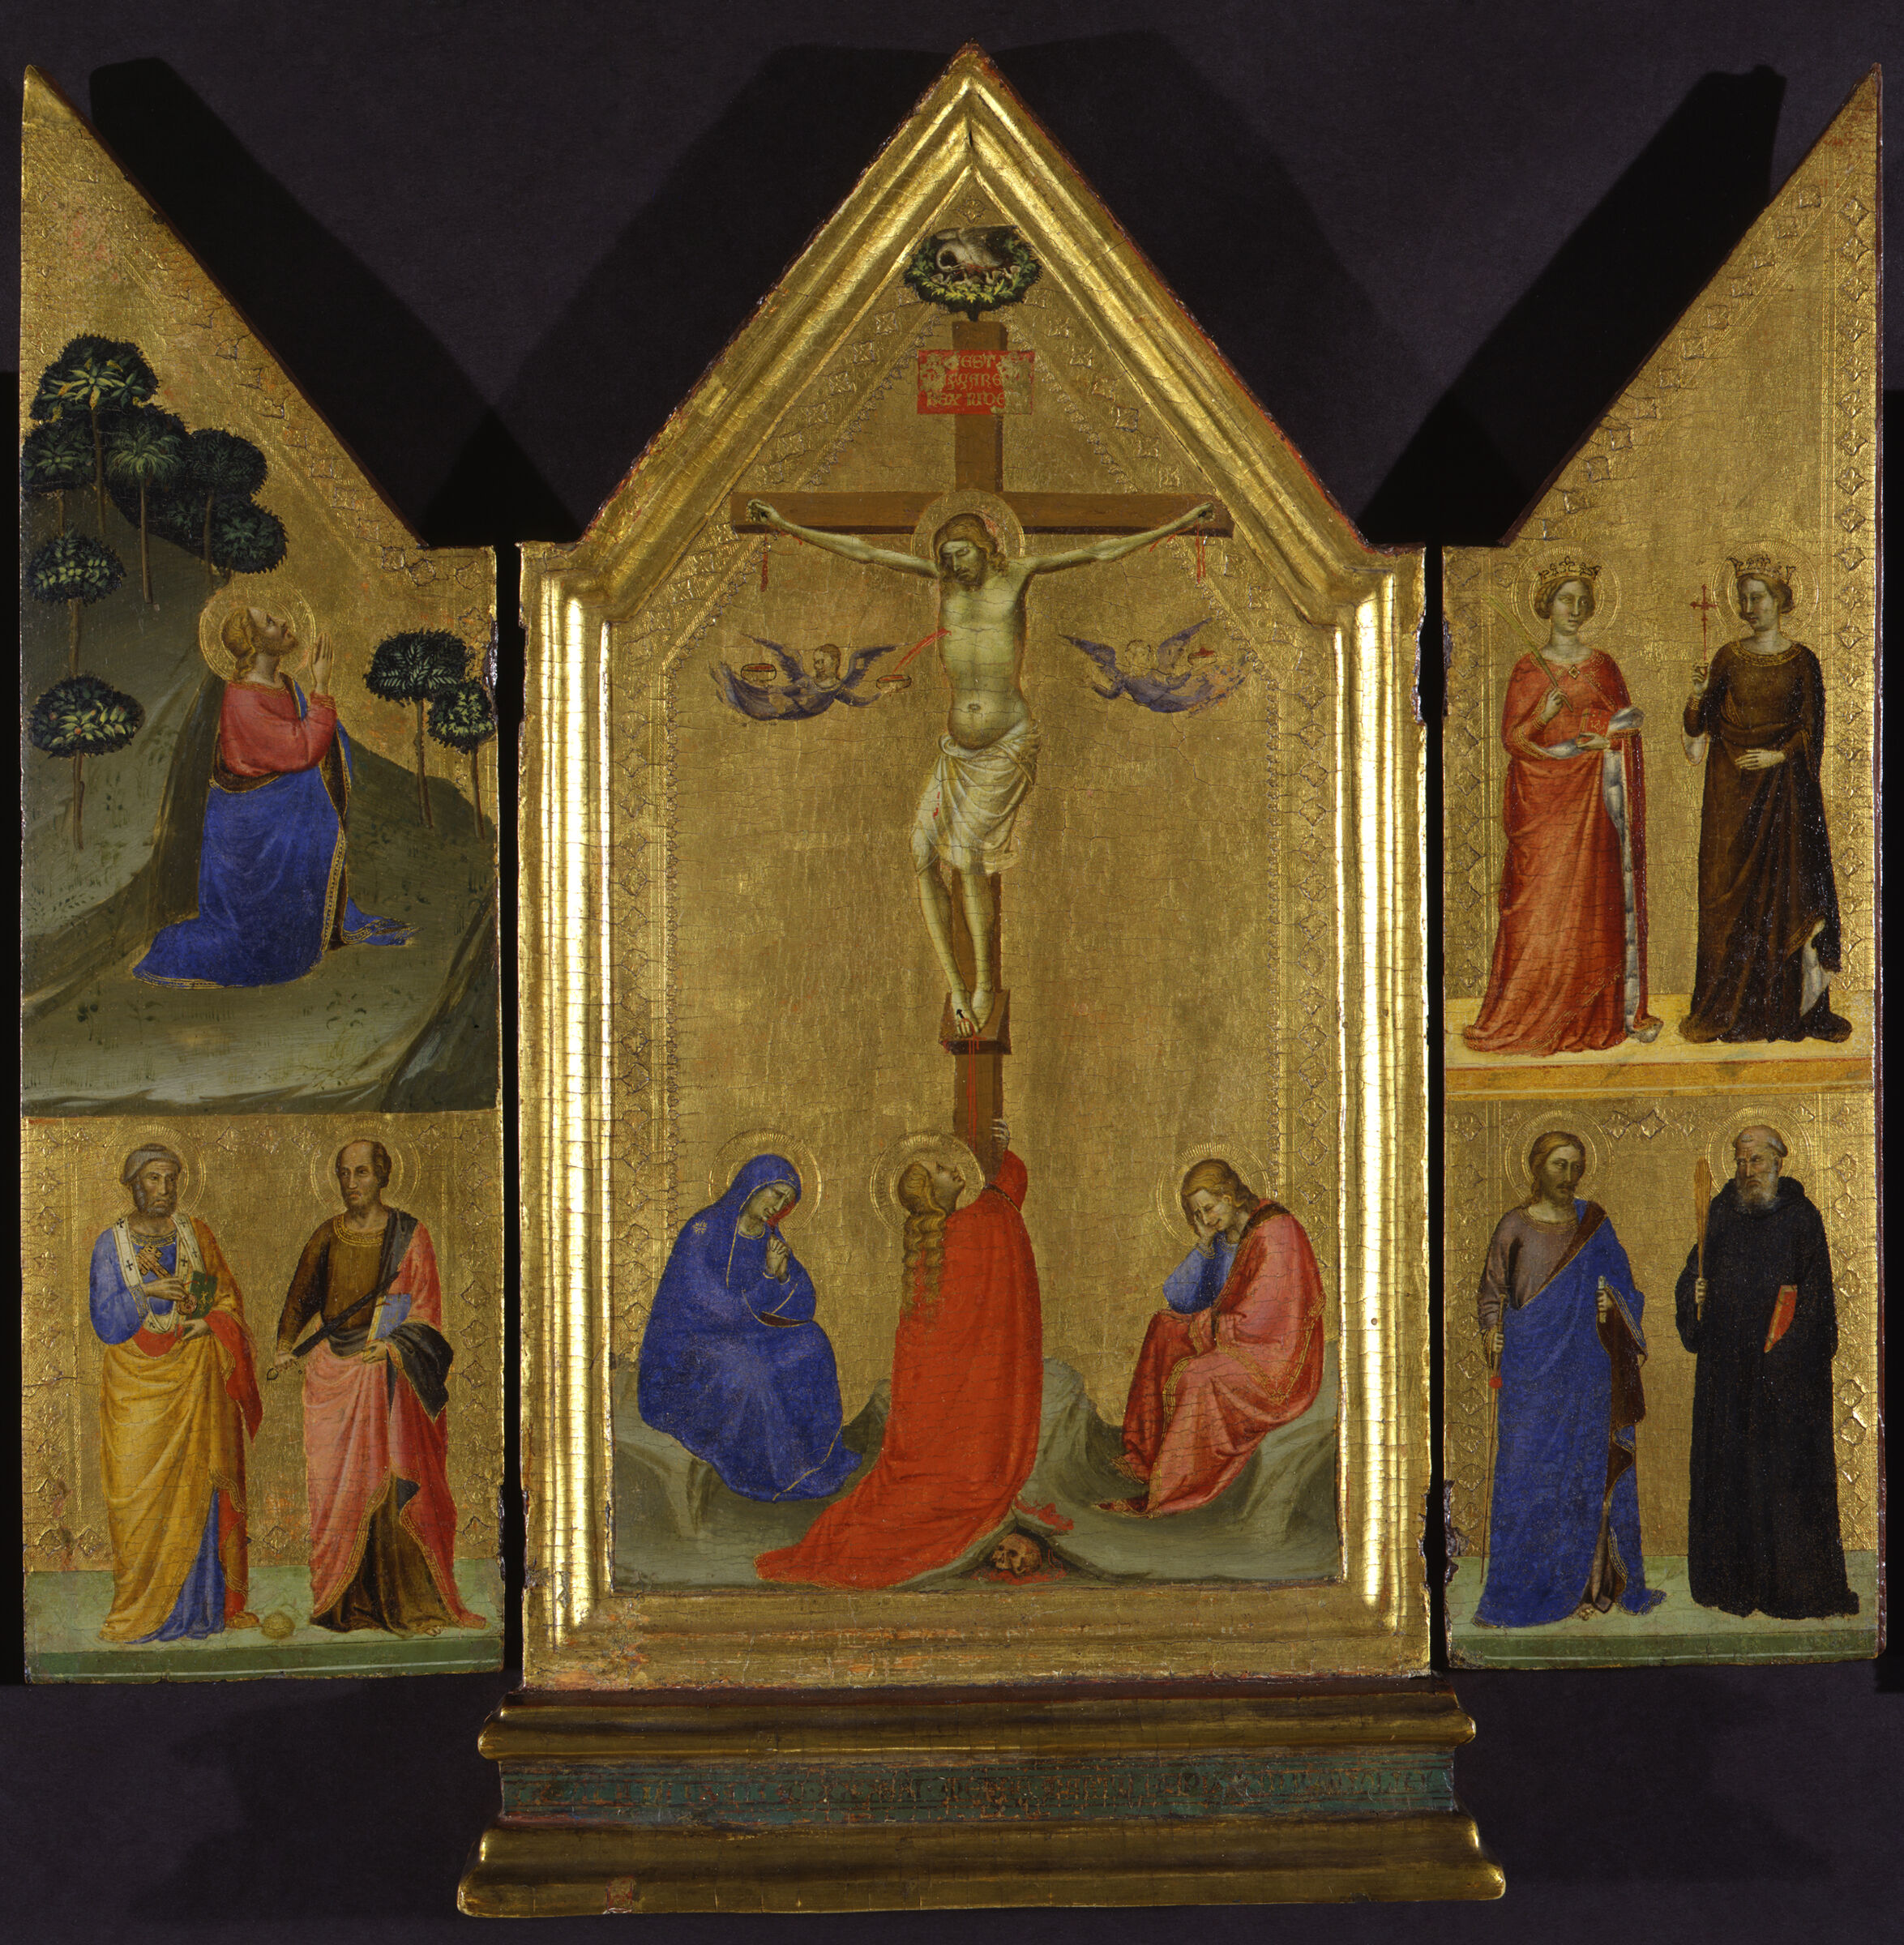 Christ On The Cross Between The Virgin And Saints Mary Magdalene And John The Evangelist; Left Panel: The Agony In The Garden And Saints Peter And Paul; Right Panel: Saints Catherine Of Alexandria And Margaret Of Antioch, Saints James Major And Benedict